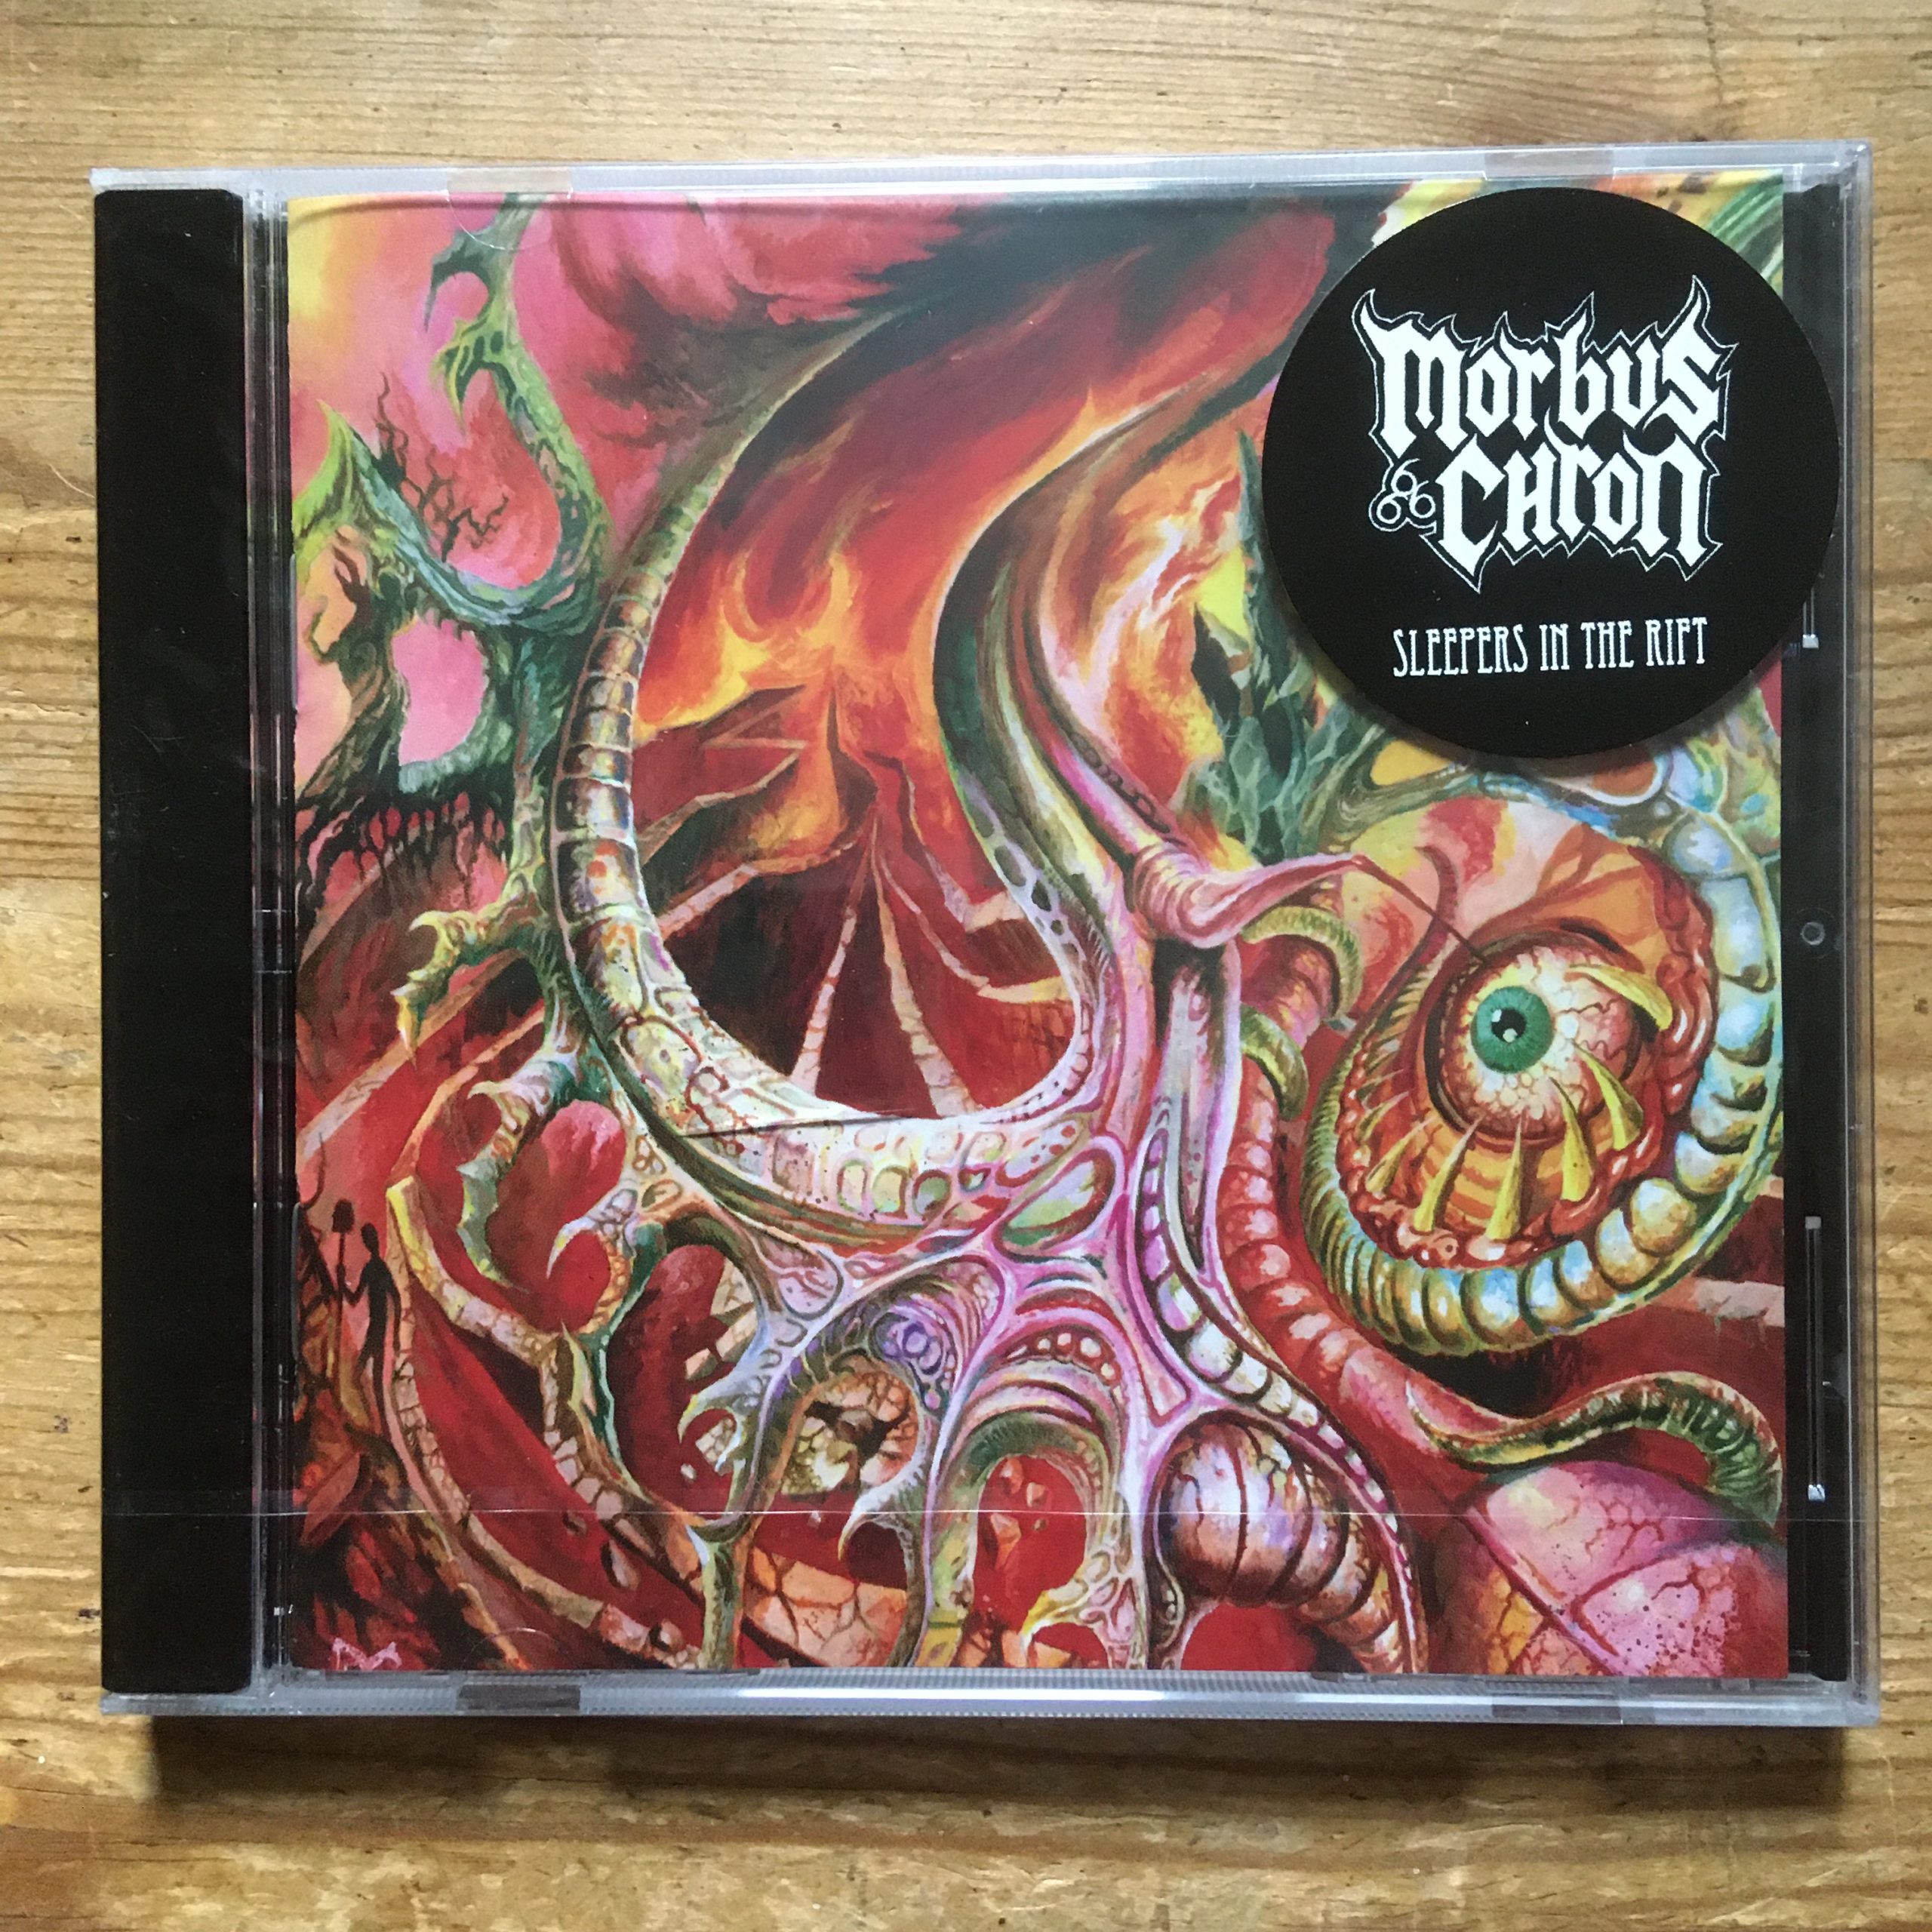 Photo of the Morbus Chron - "Sleepers in the Rift" CD